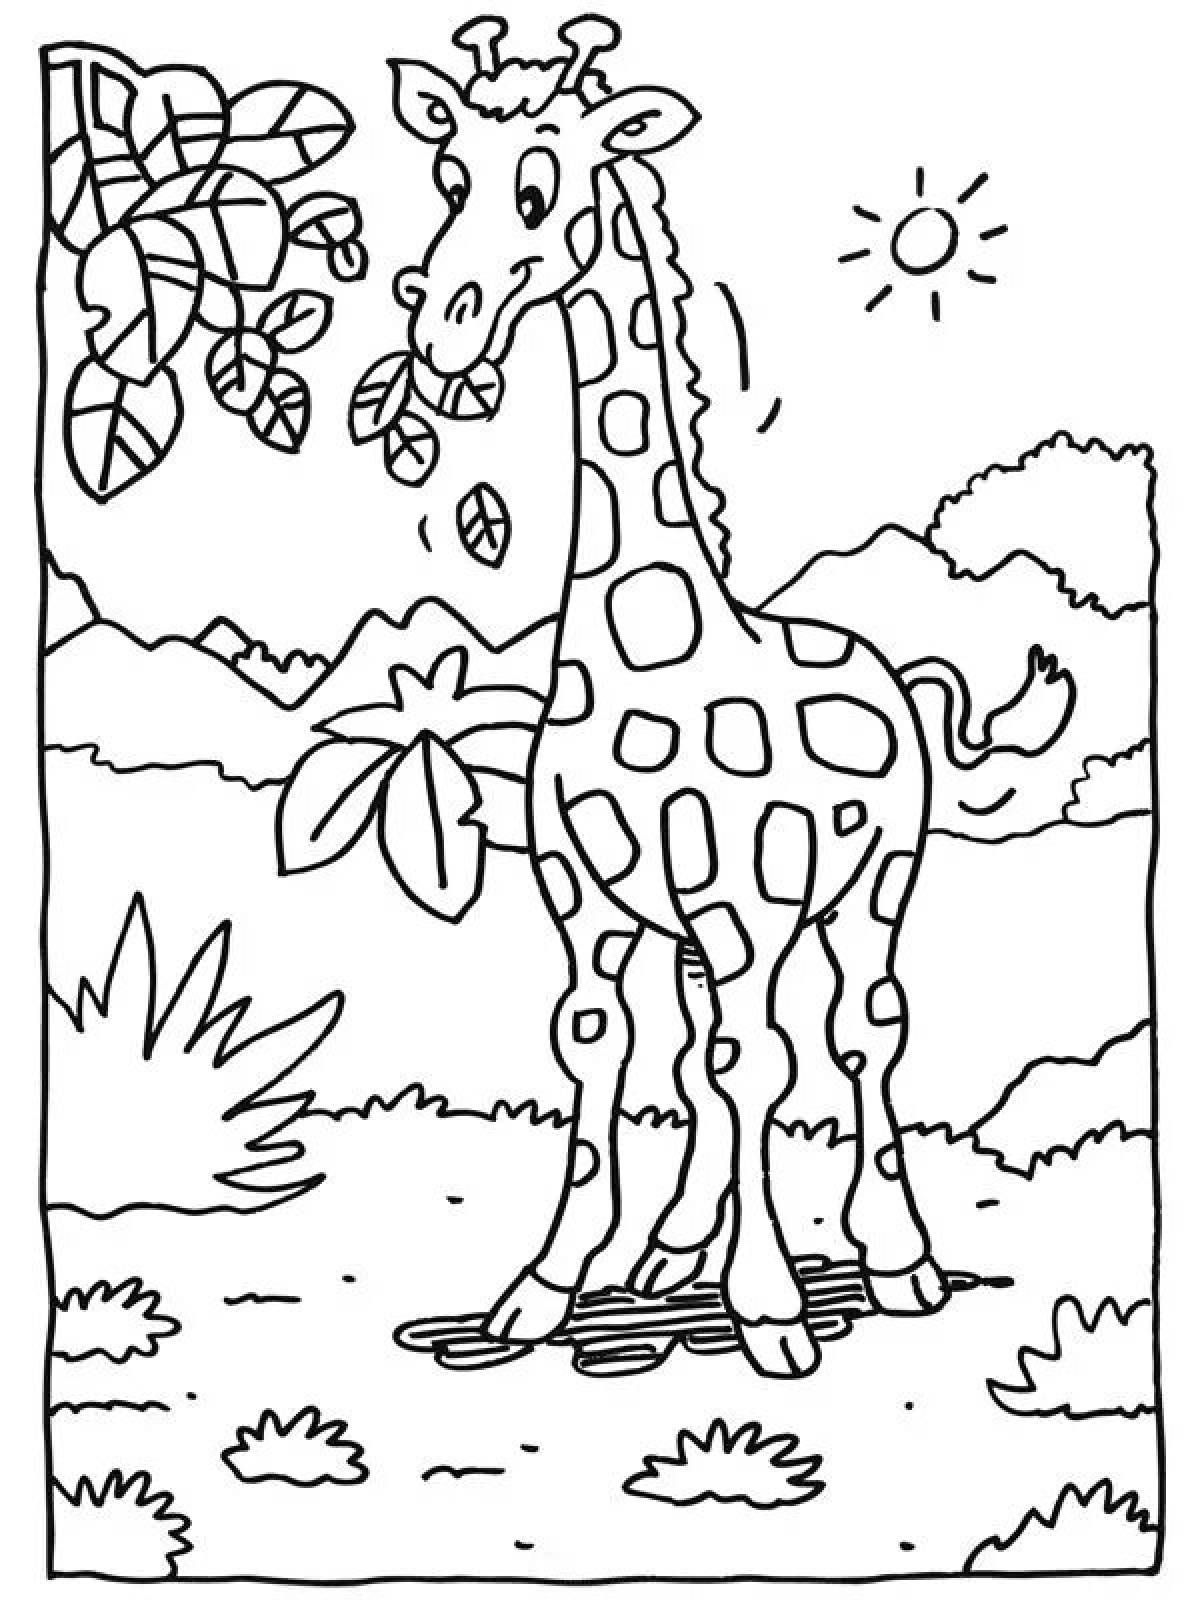 Amazing giraffe coloring pages for kids